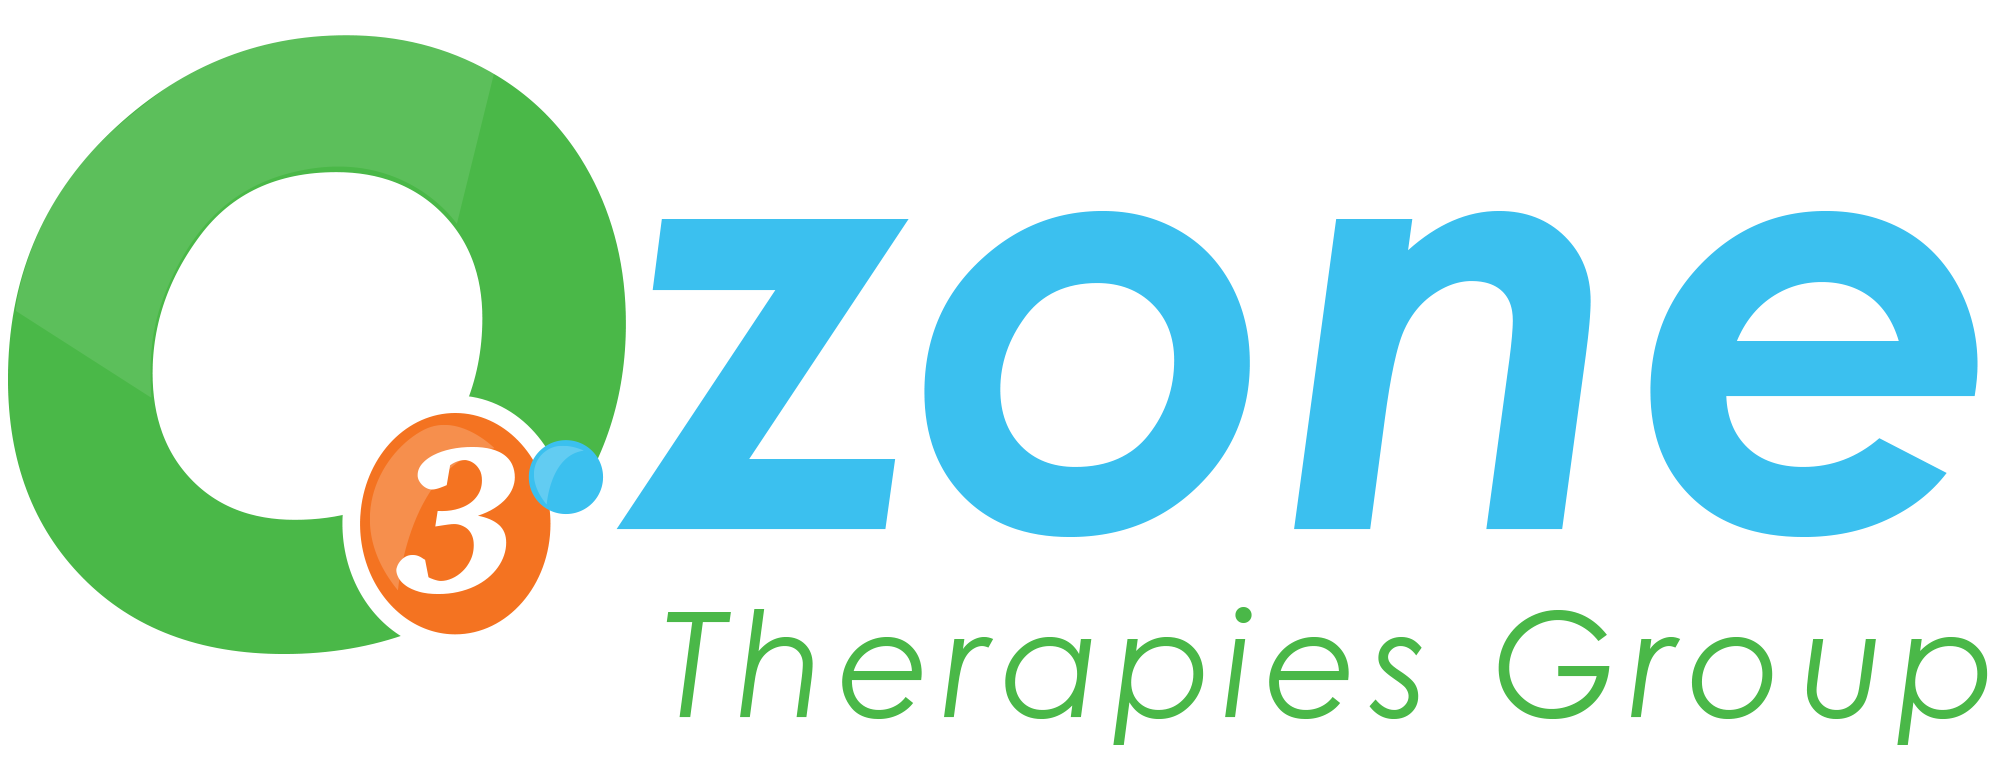 Company Logo For Ozone Therapies Group'